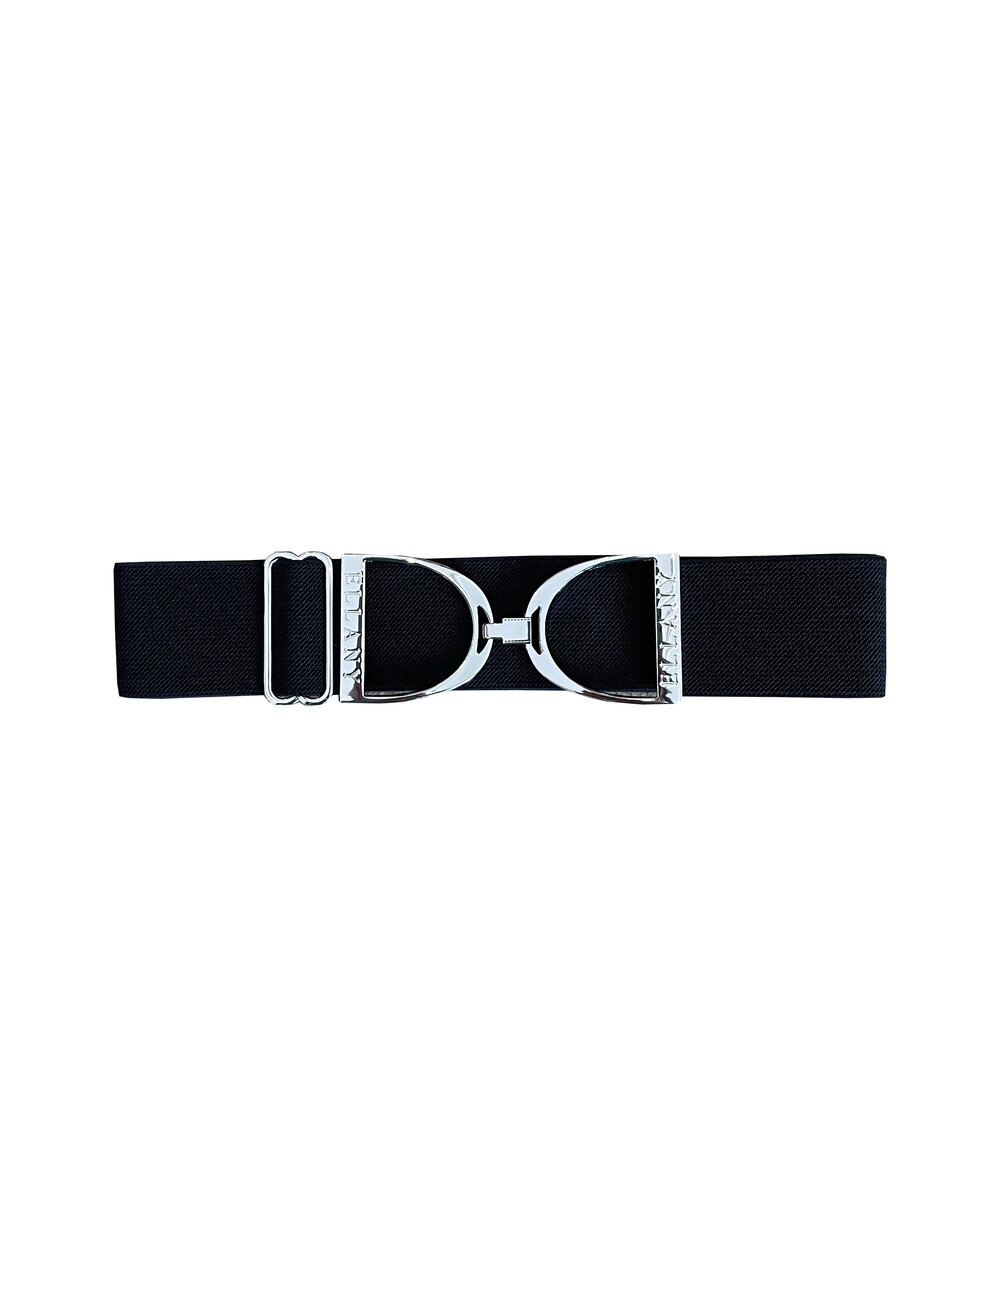 Black Stirrup Elastic Belt- 5 Options — Le Fash - A modern equestrian  lifestyle brand with style for stable & street